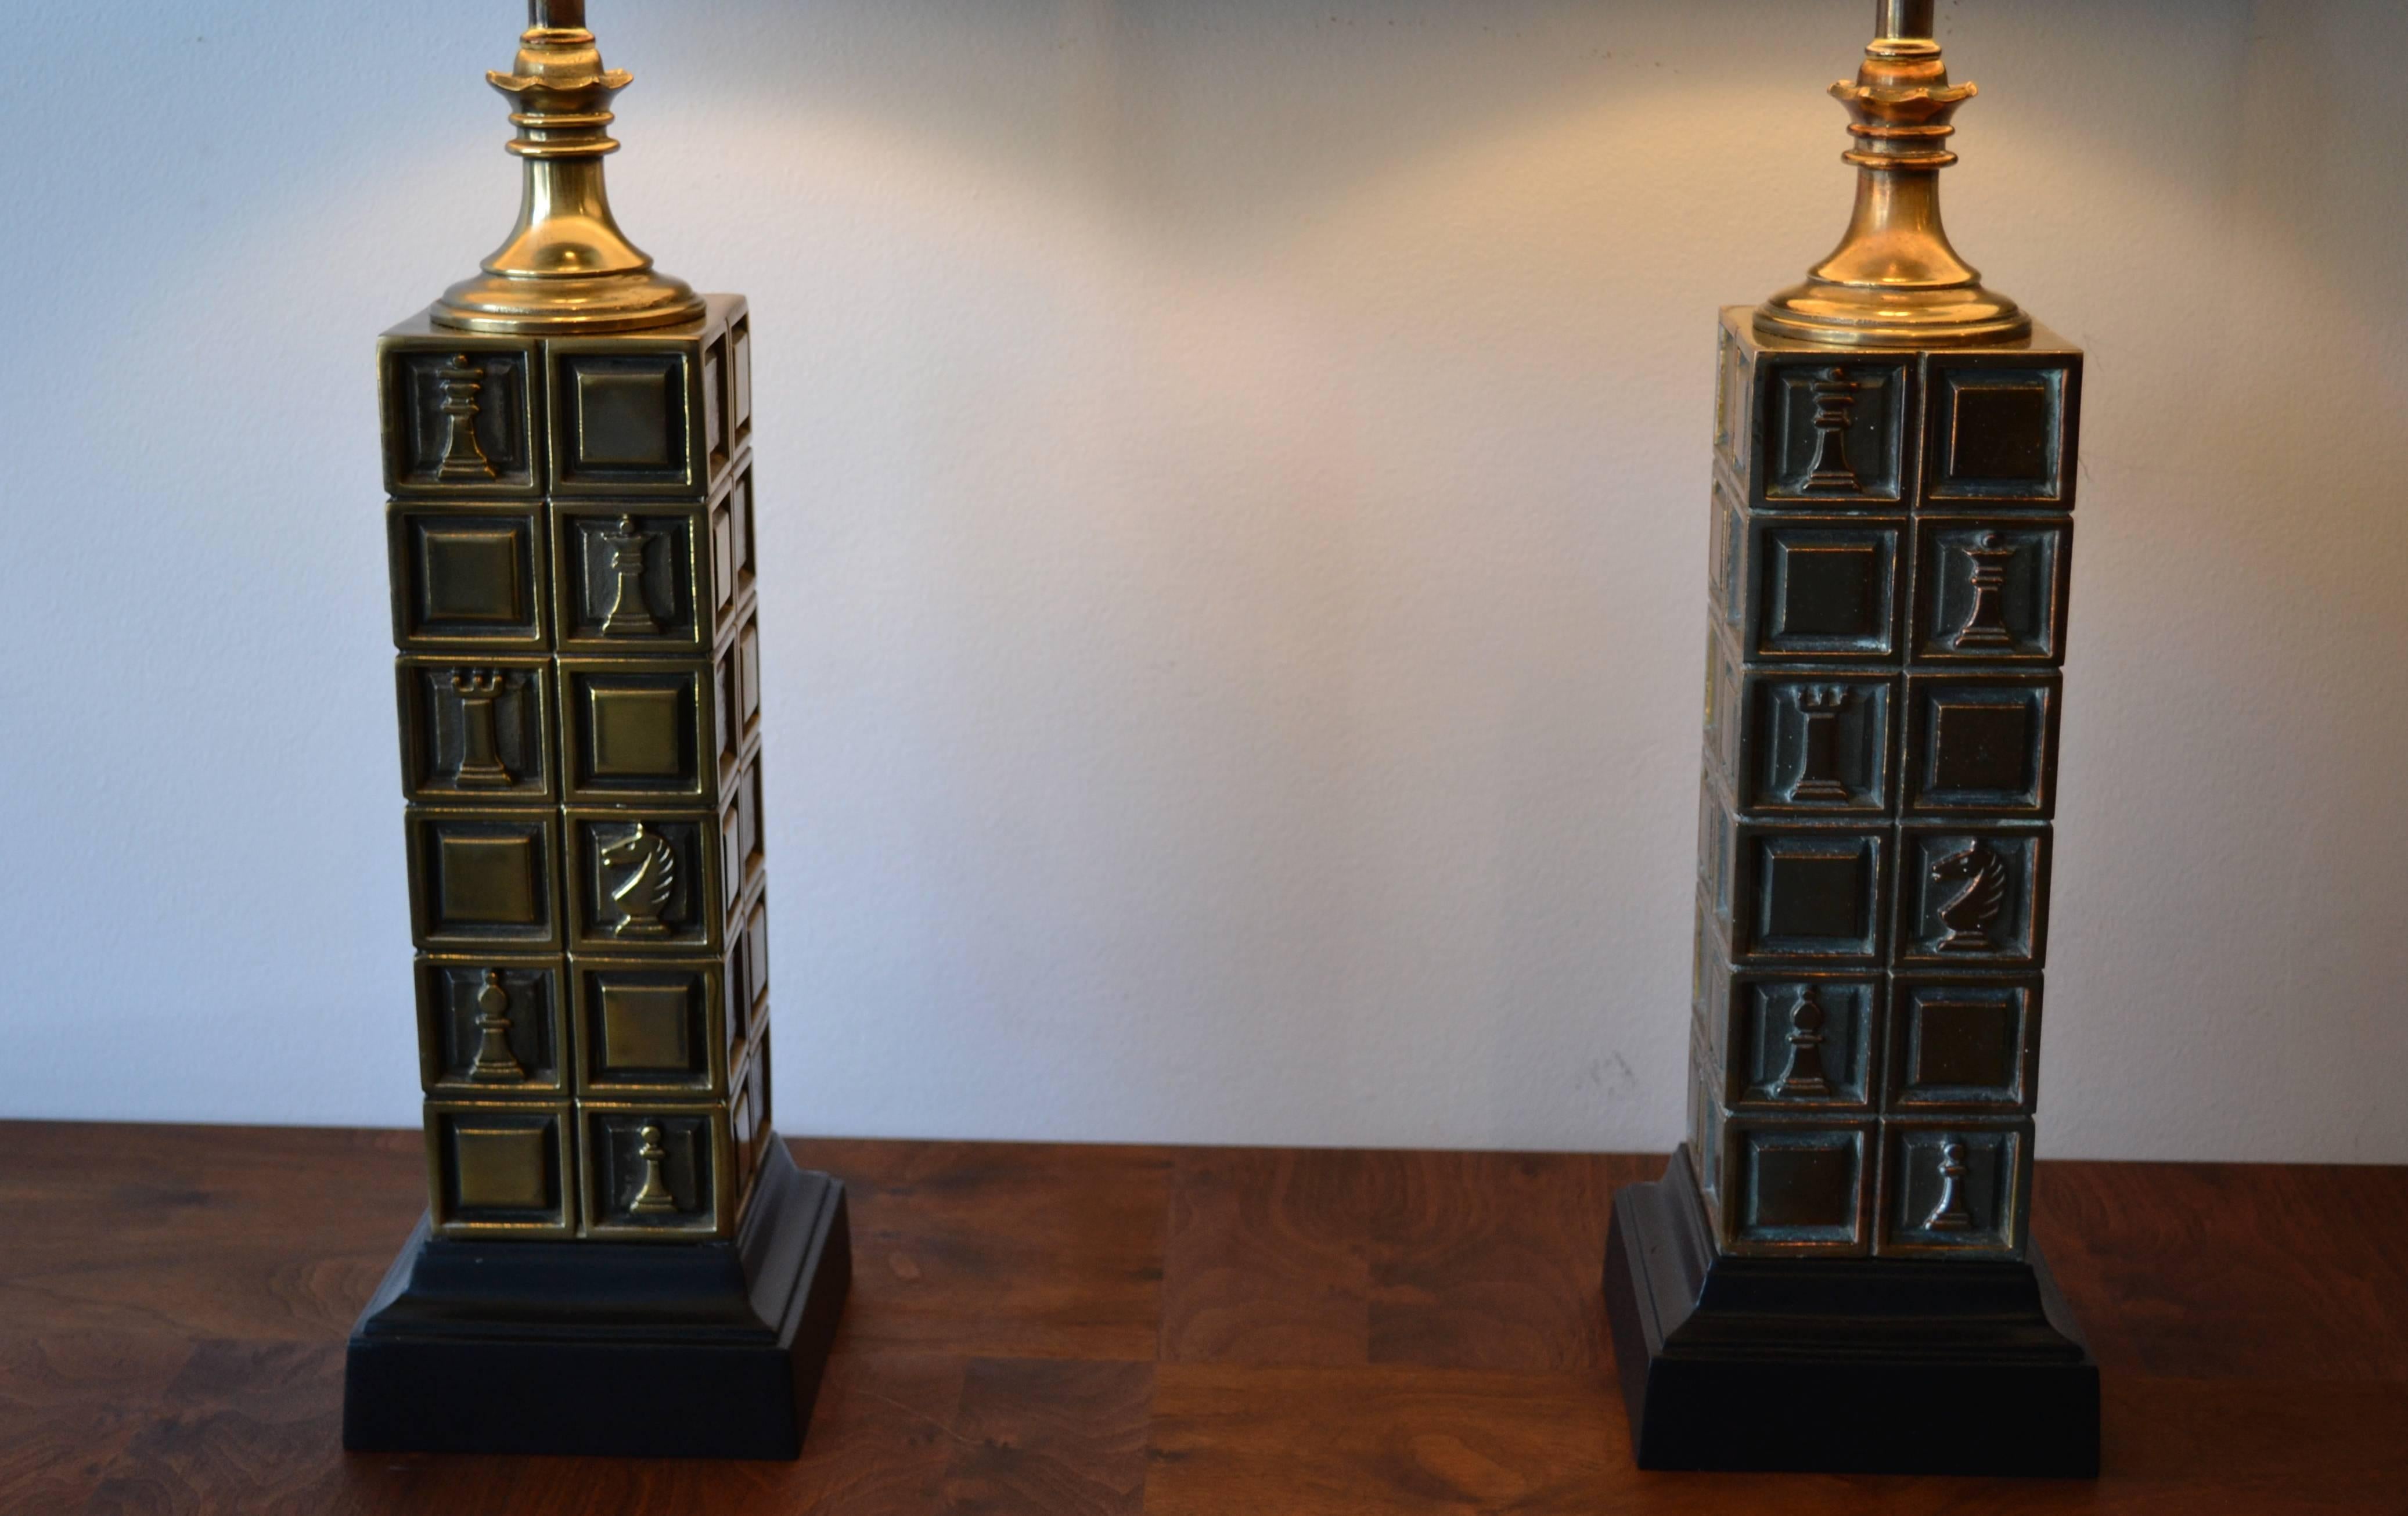 Fabulous pair of Mid-Century Modern brass chess piece table lamps with wood base. In excellent condition. All original. Expertly rewired. Perfect for the den or library!